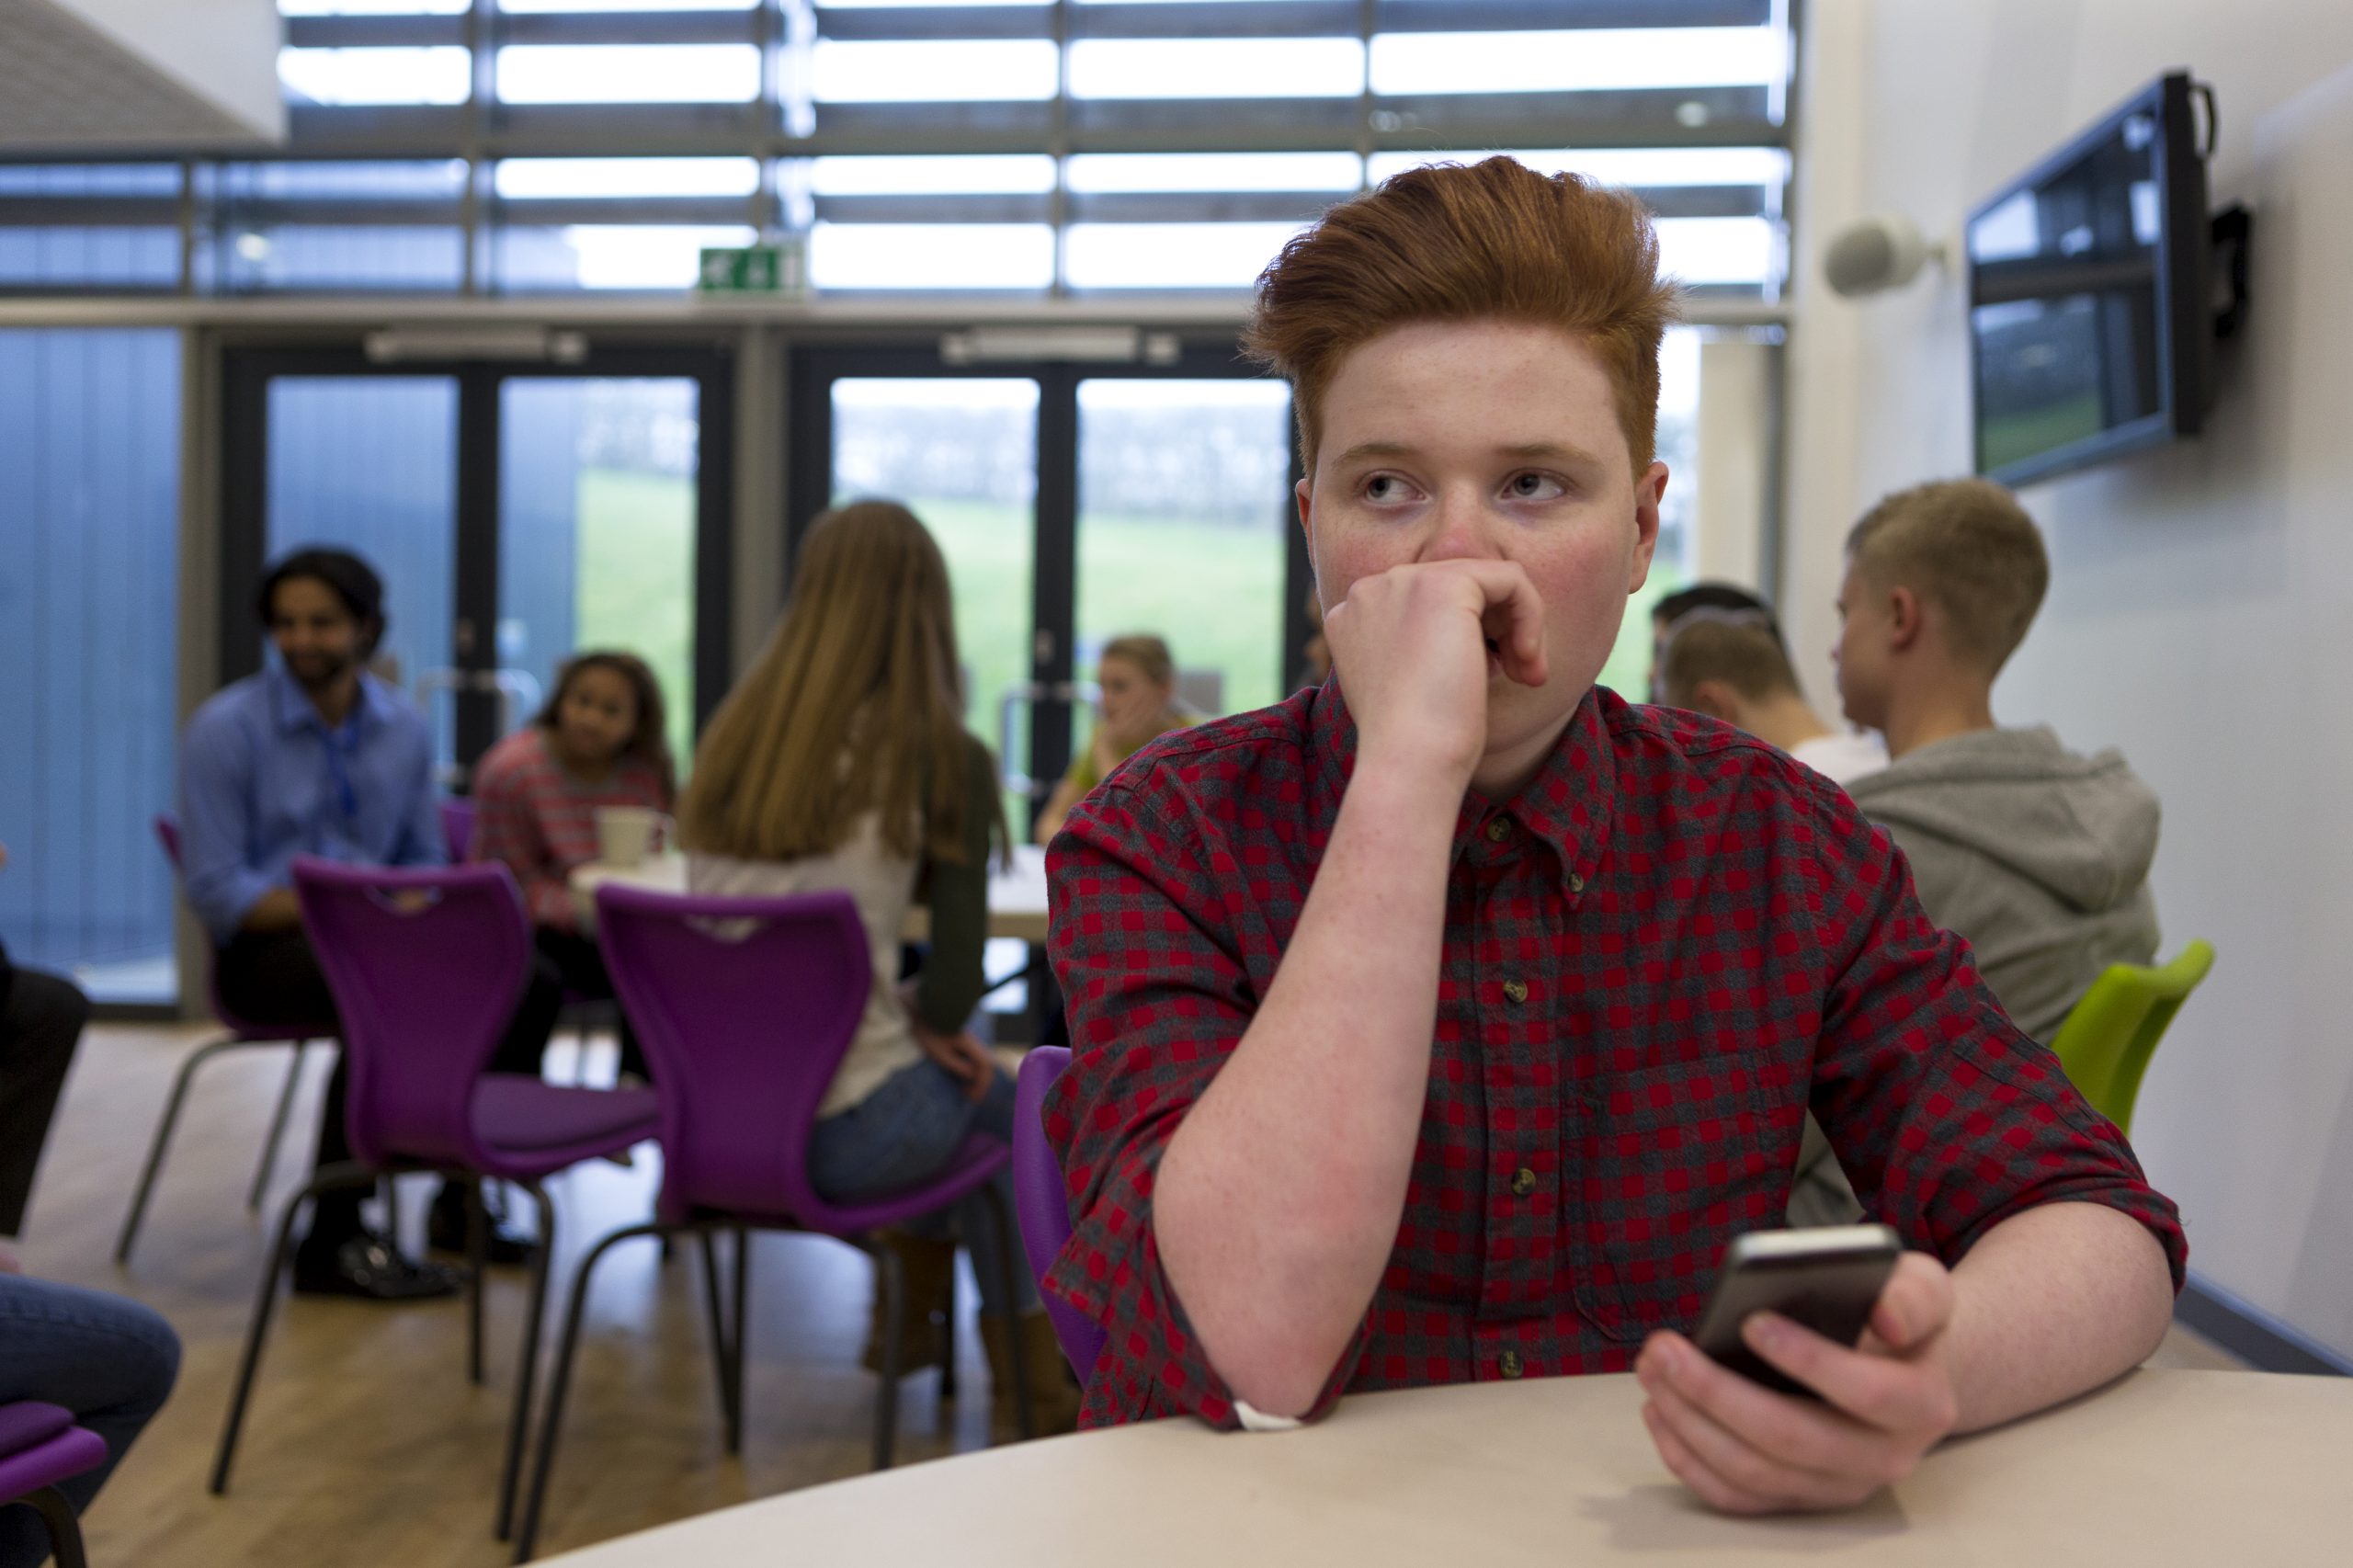 A stressed teenage boy with a smartphone in hand.